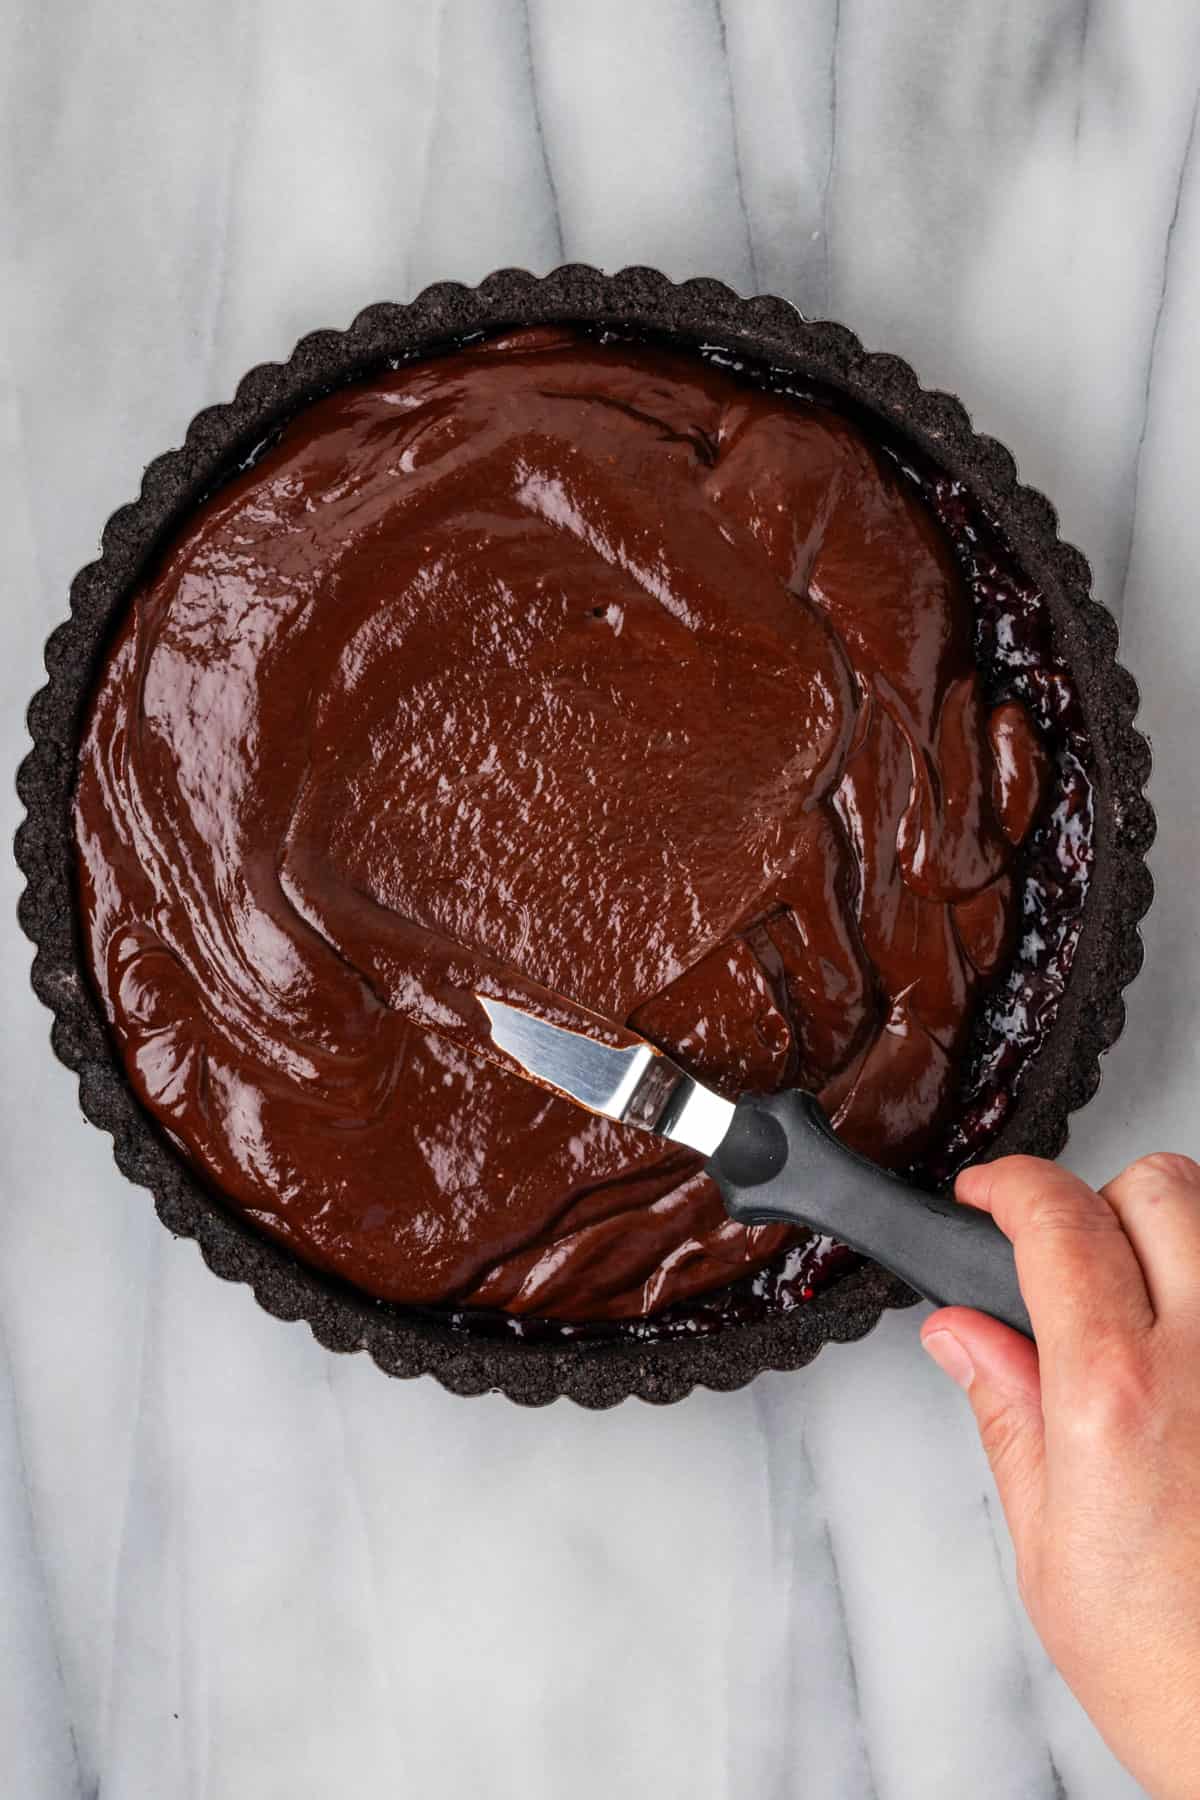 Chocolate ganache being spread over the cherry filling with an offset spatula.